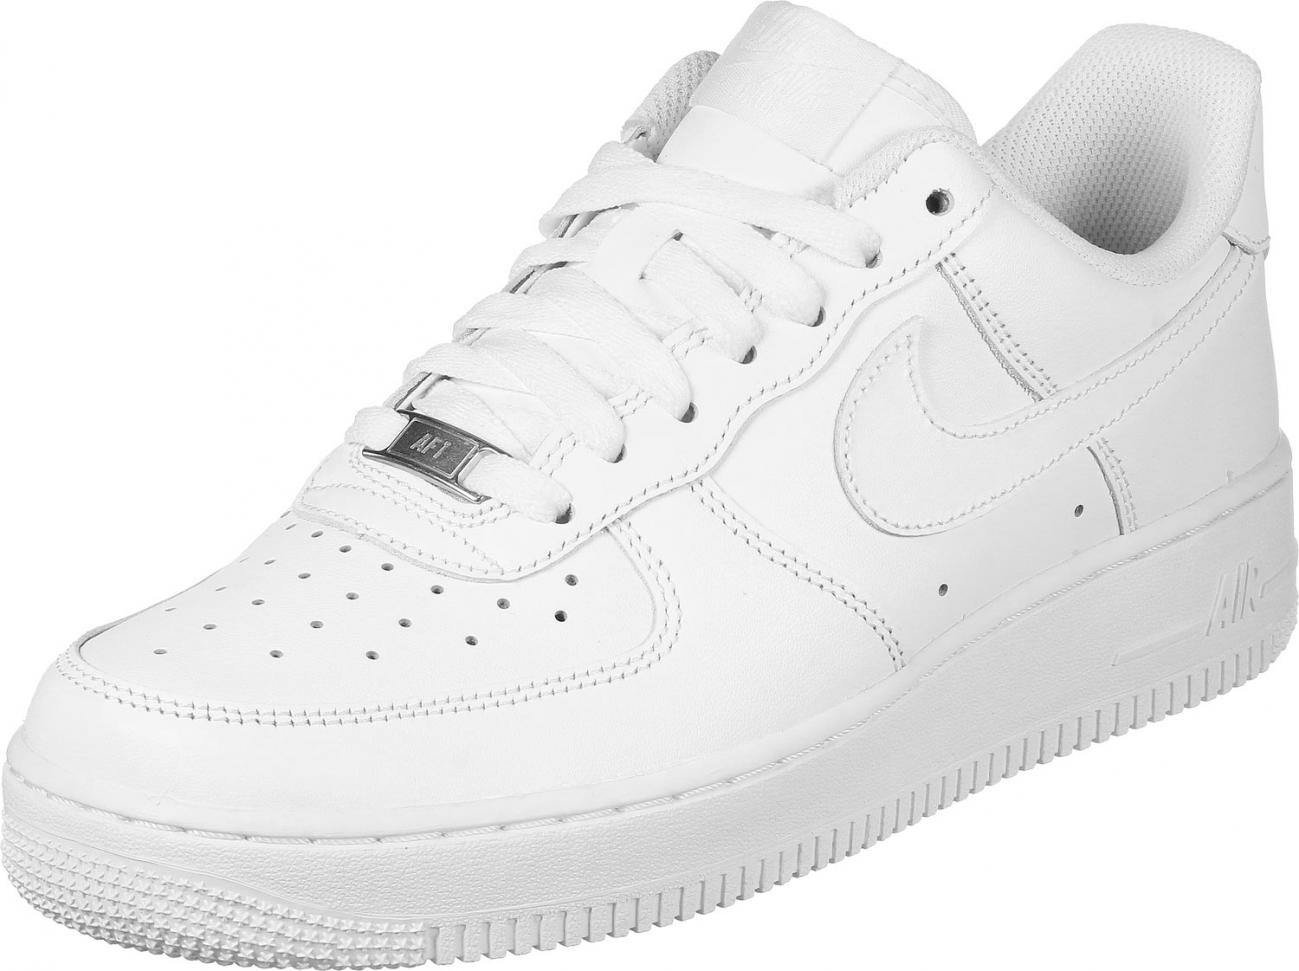 basket nike air force blanche femme cheap buy online